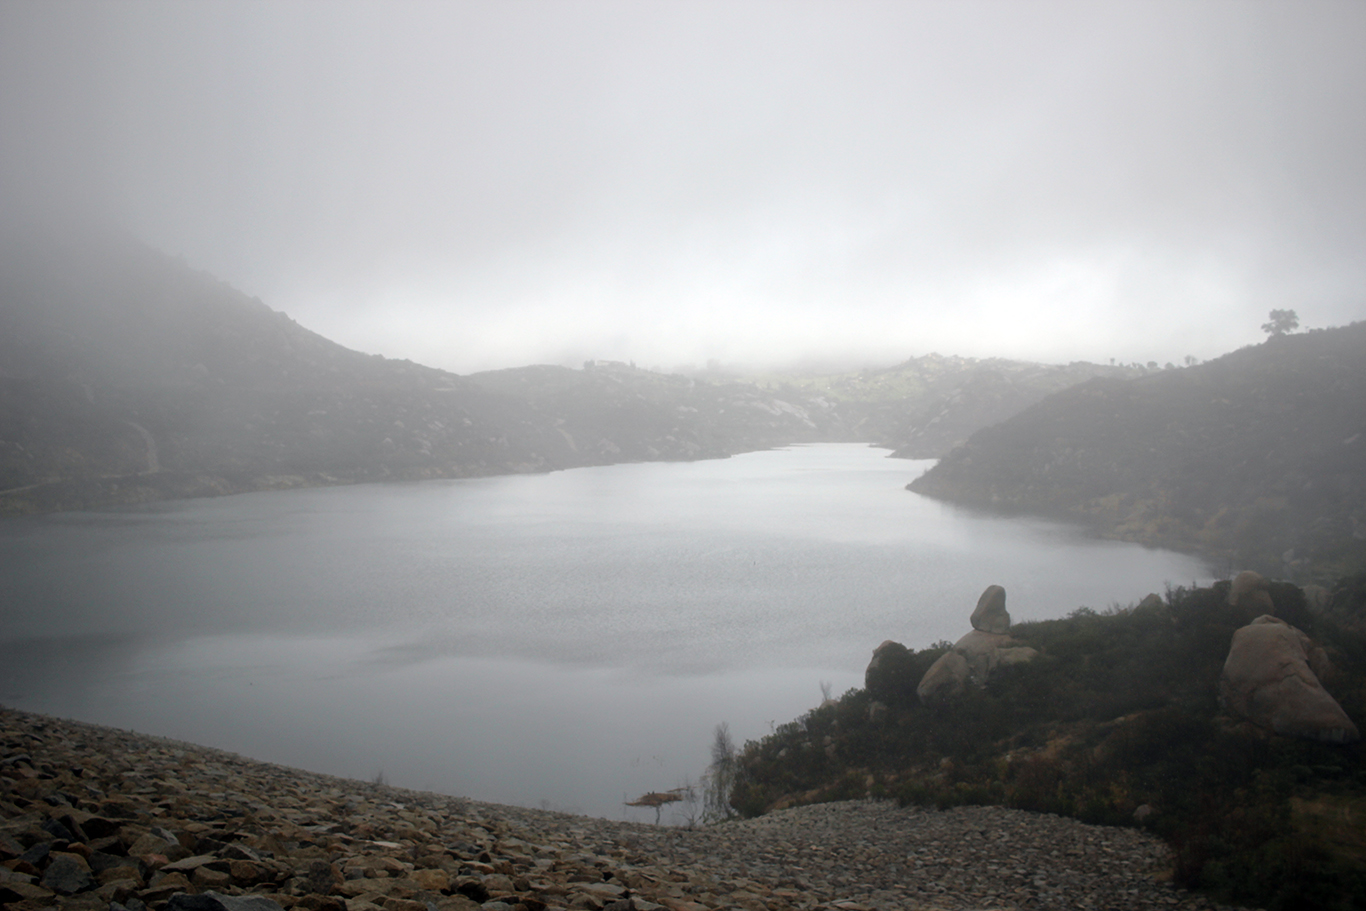 The misty, rainy view at the top of Ramona Dam on the Blue Sky Reserve hike